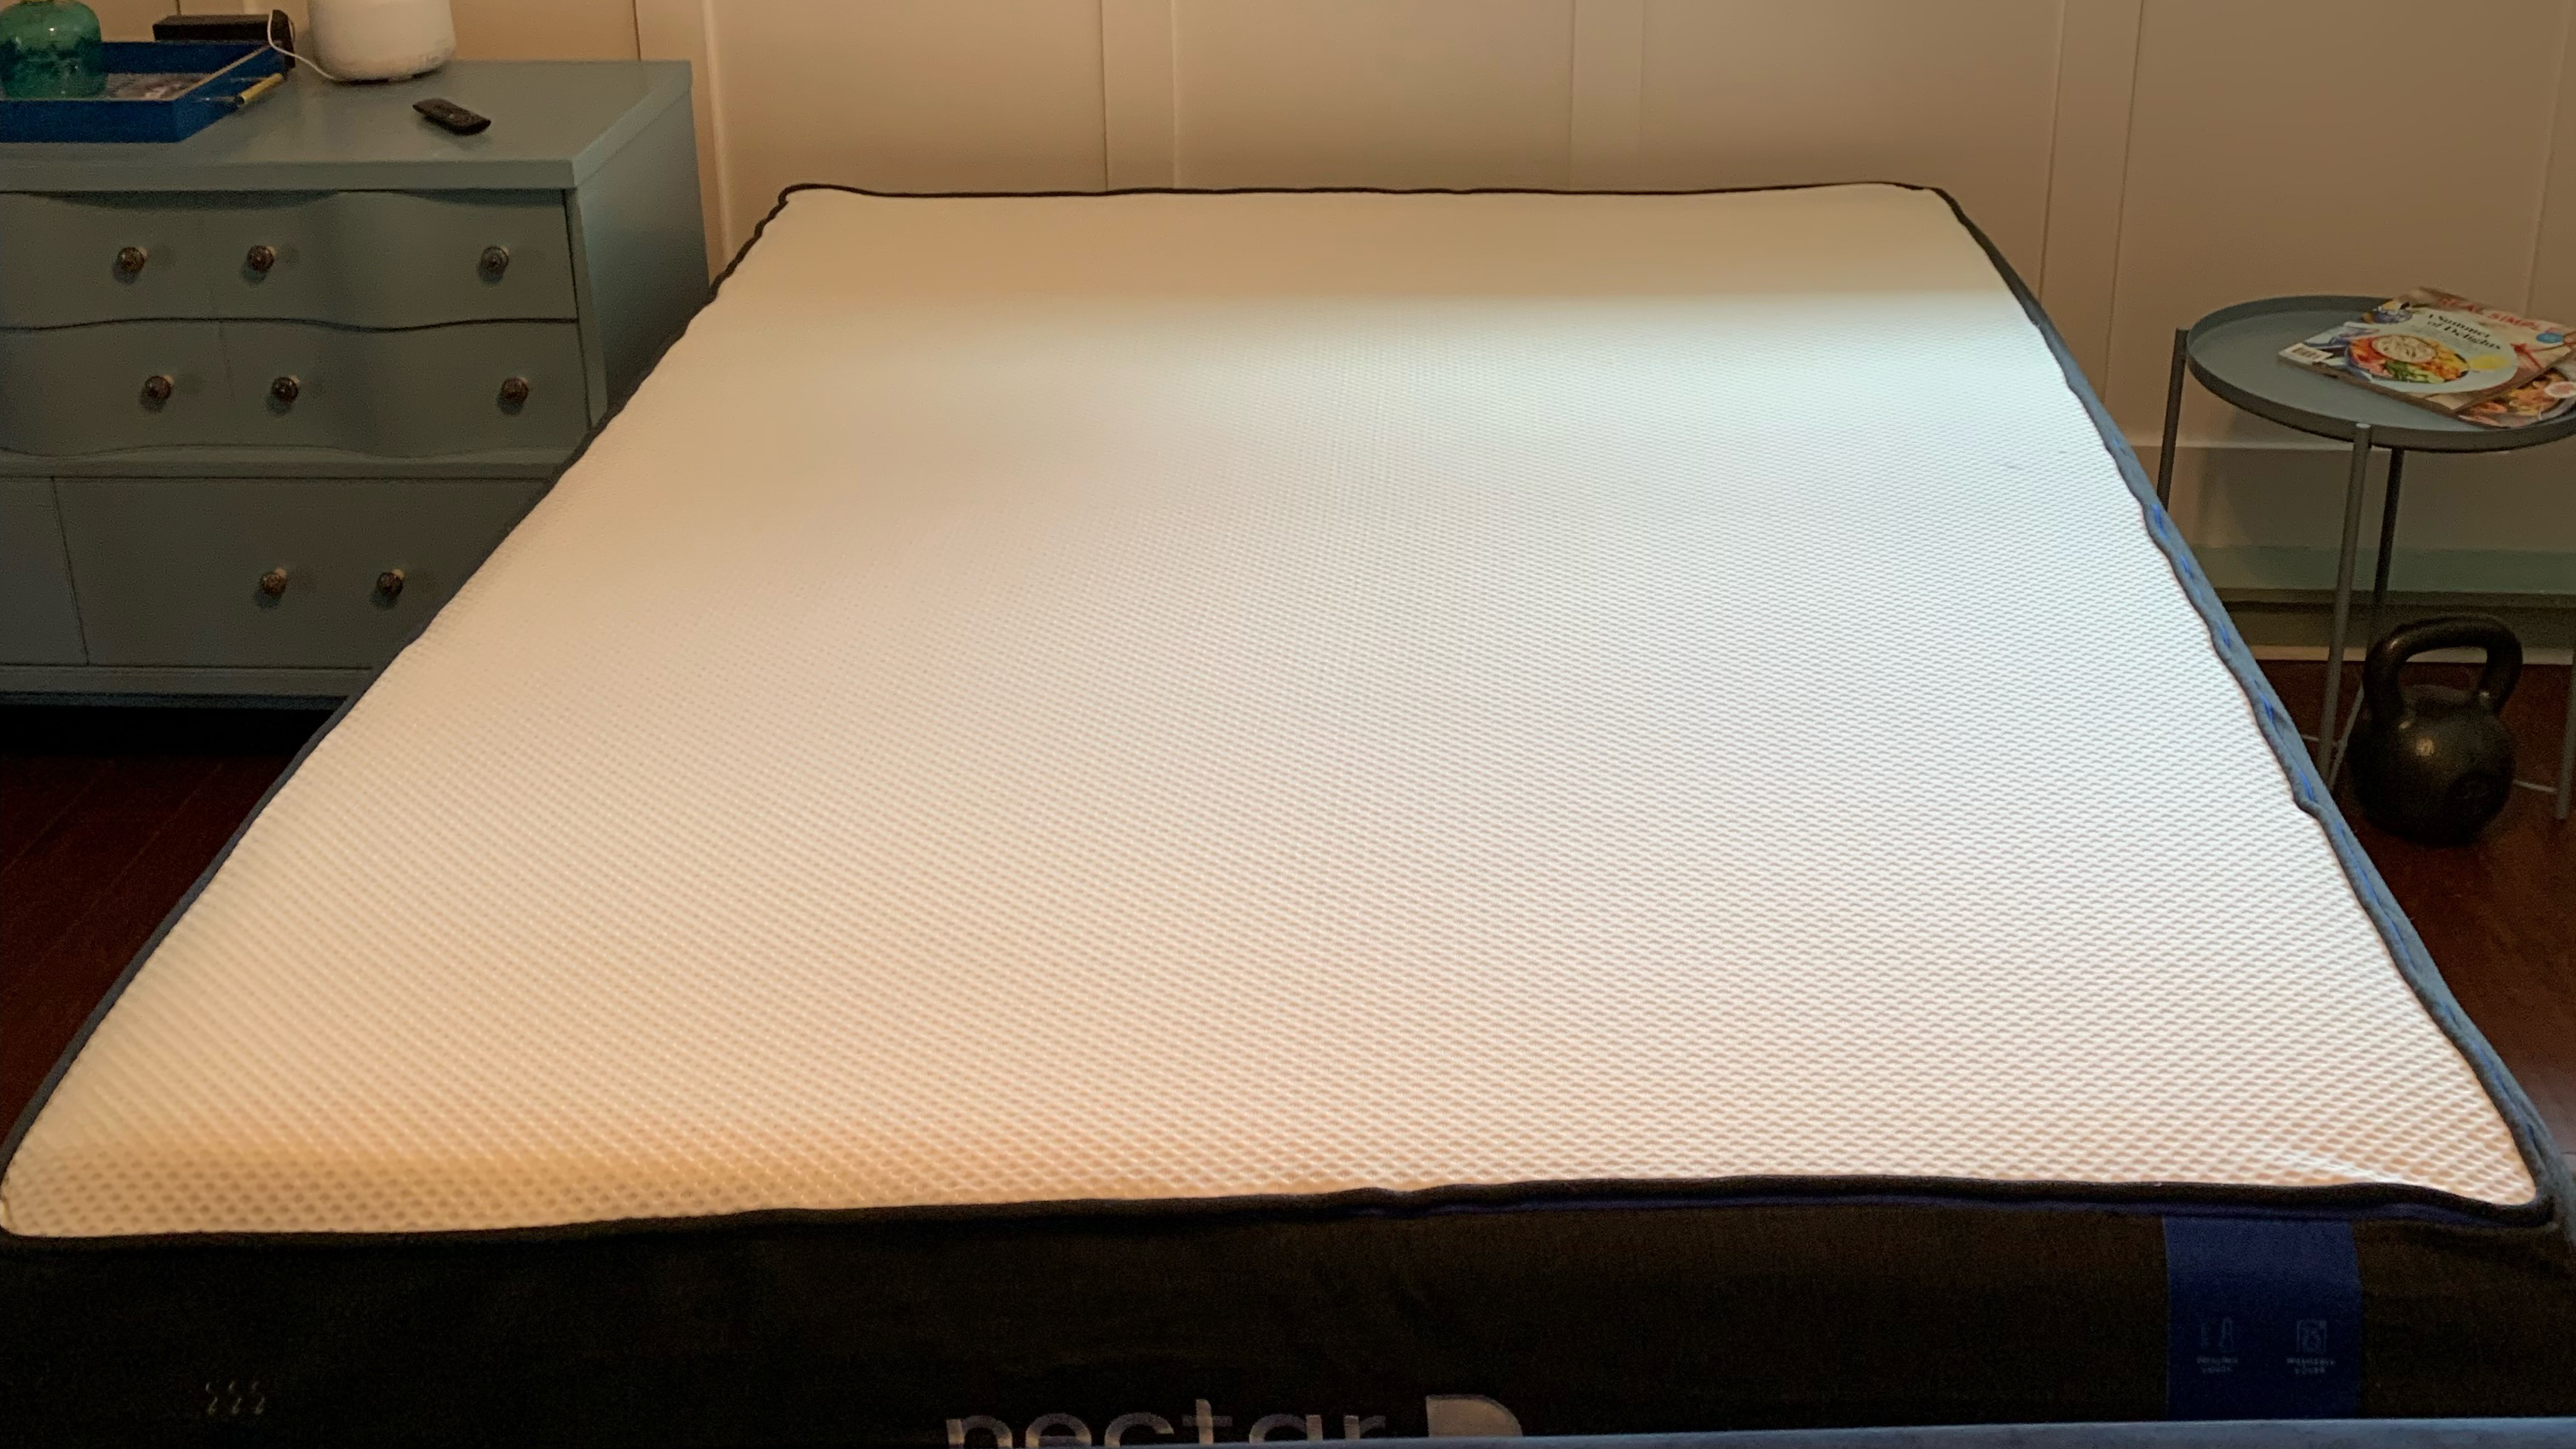 The Nectar Mattress shown on a plain black bed frame during our review and testing period